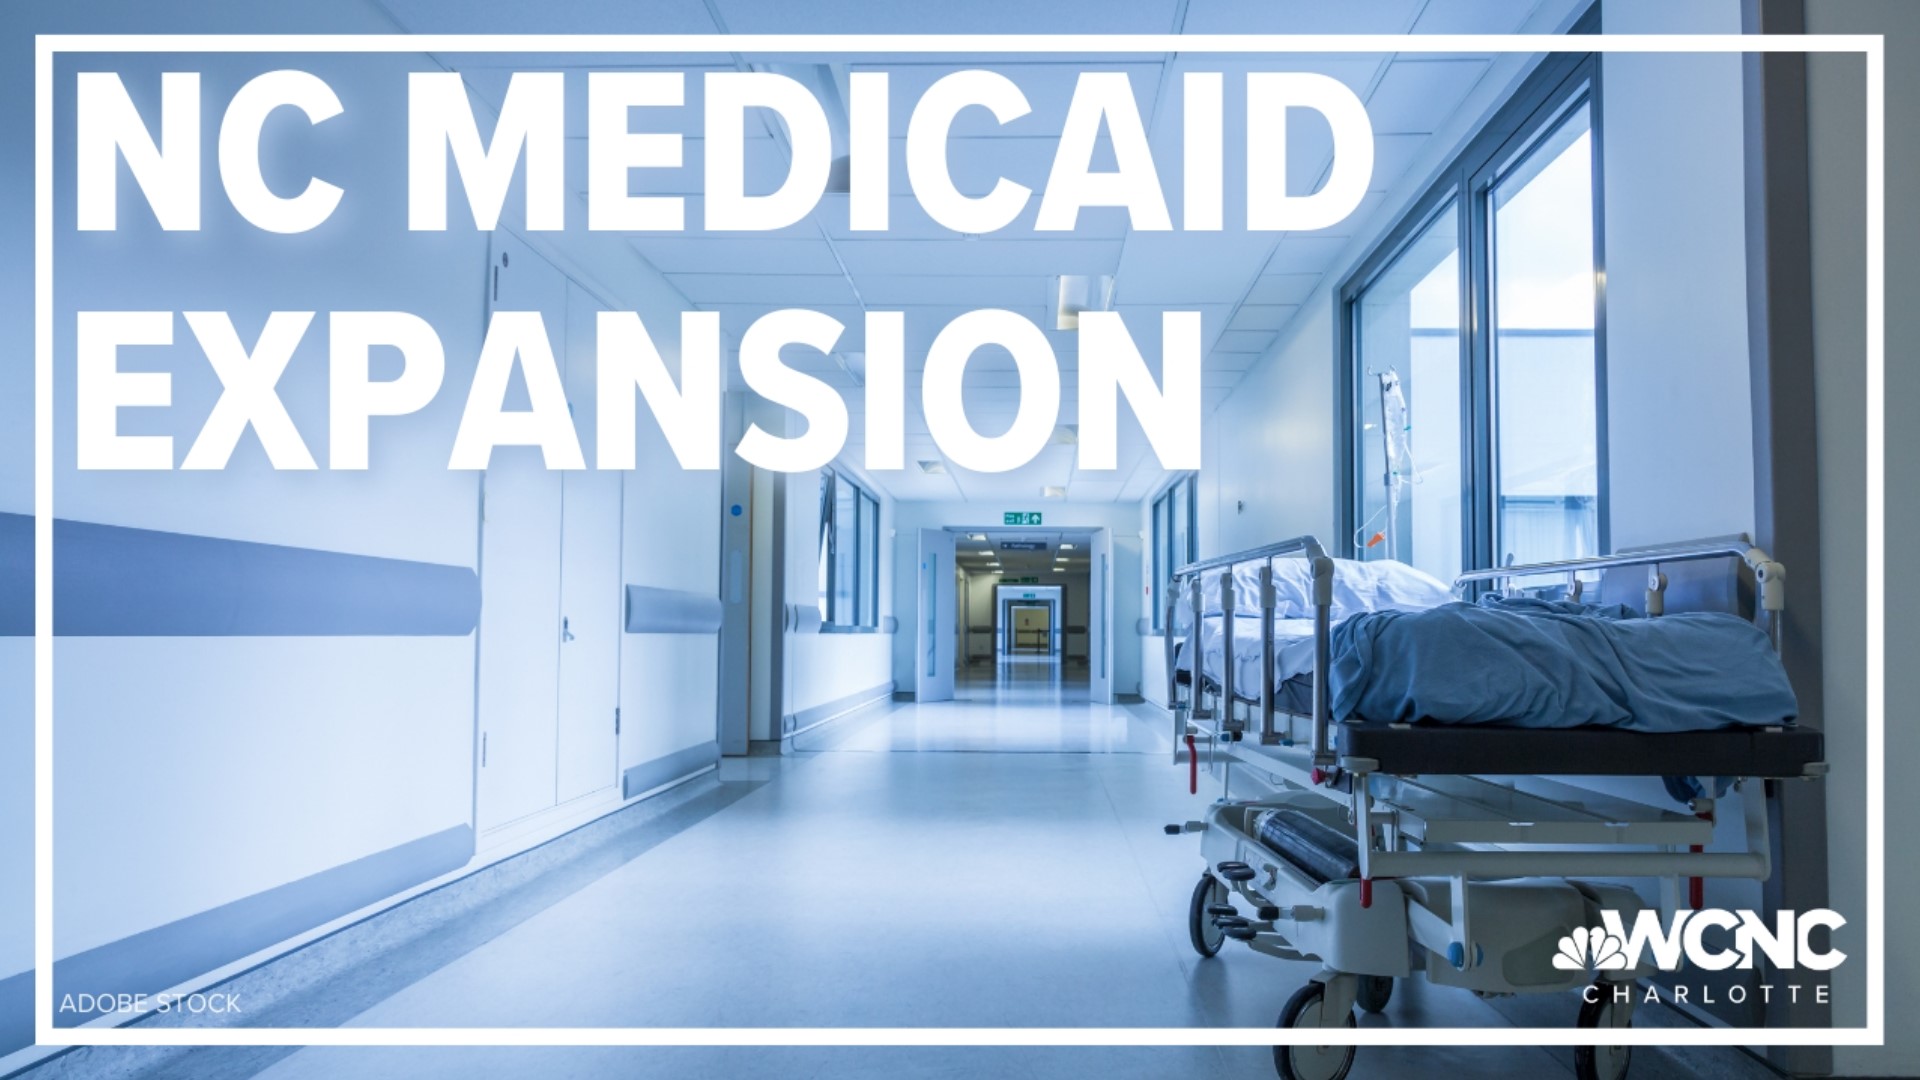 The Republican-controlled General Assembly gave final legislative approval to Medicaid expansion, revering its longstanding opposition.